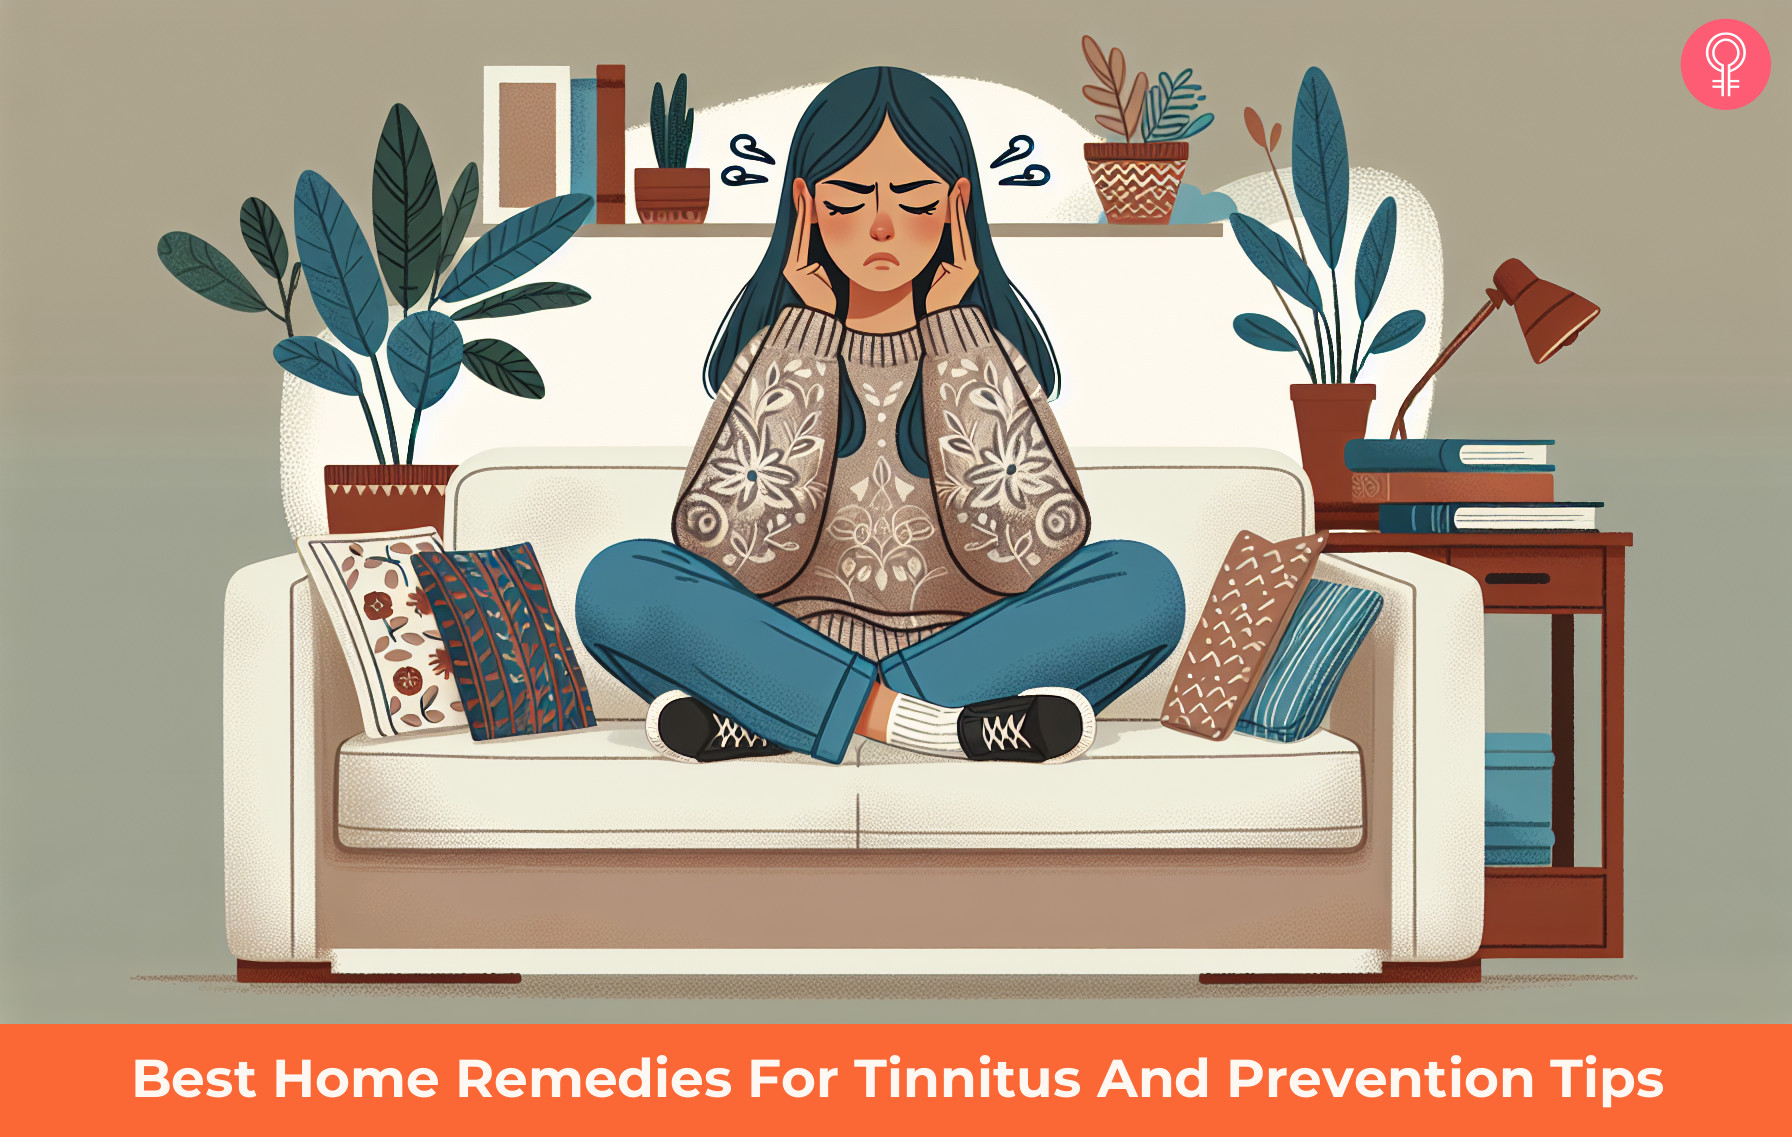 25 Best Home Remedies For Tinnitus And Prevention Tips